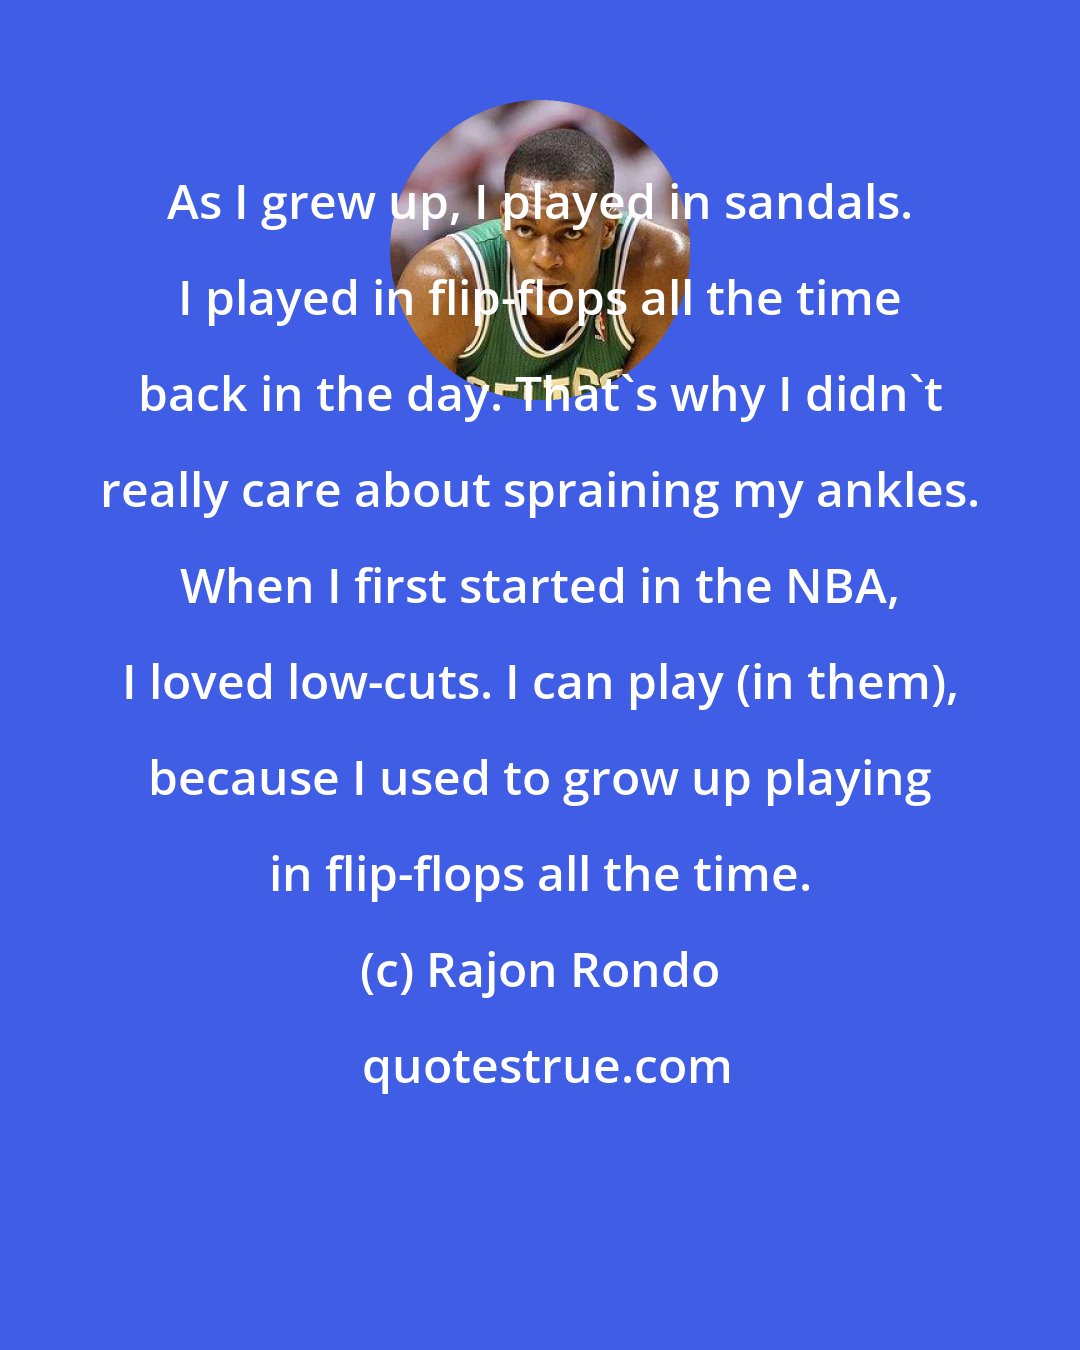 Rajon Rondo: As I grew up, I played in sandals. I played in flip-flops all the time back in the day. That's why I didn't really care about spraining my ankles. When I first started in the NBA, I loved low-cuts. I can play (in them), because I used to grow up playing in flip-flops all the time.